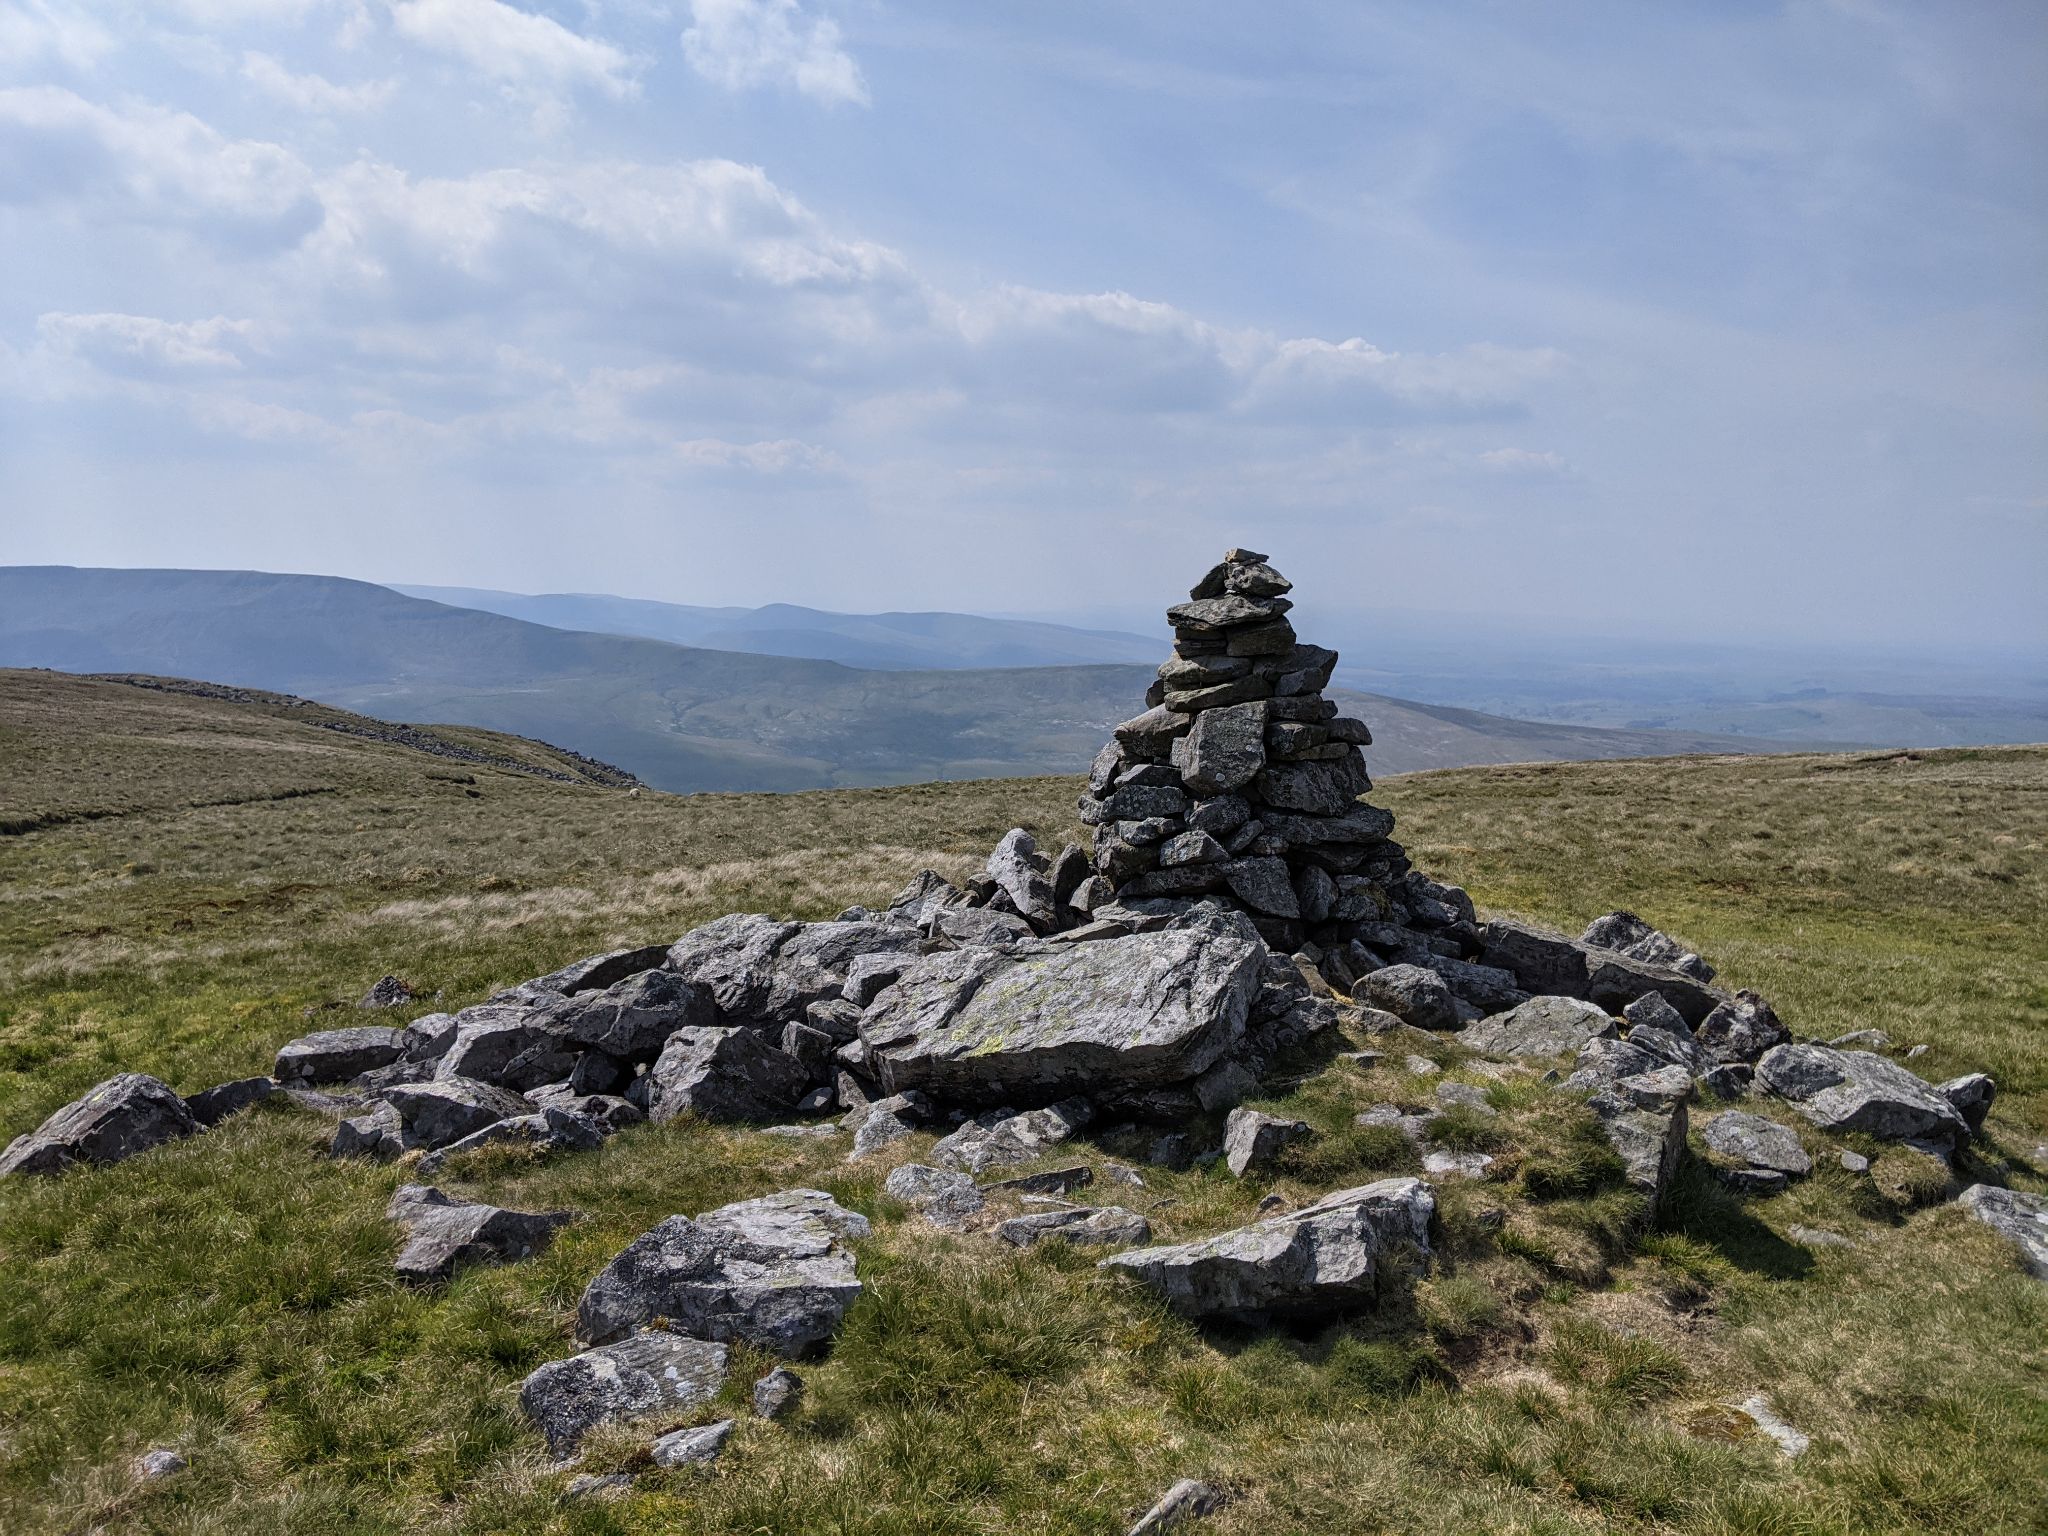 Community photo by Kevan Hubbard | High Seat (mountain), Yorkshire Dales National Park, England